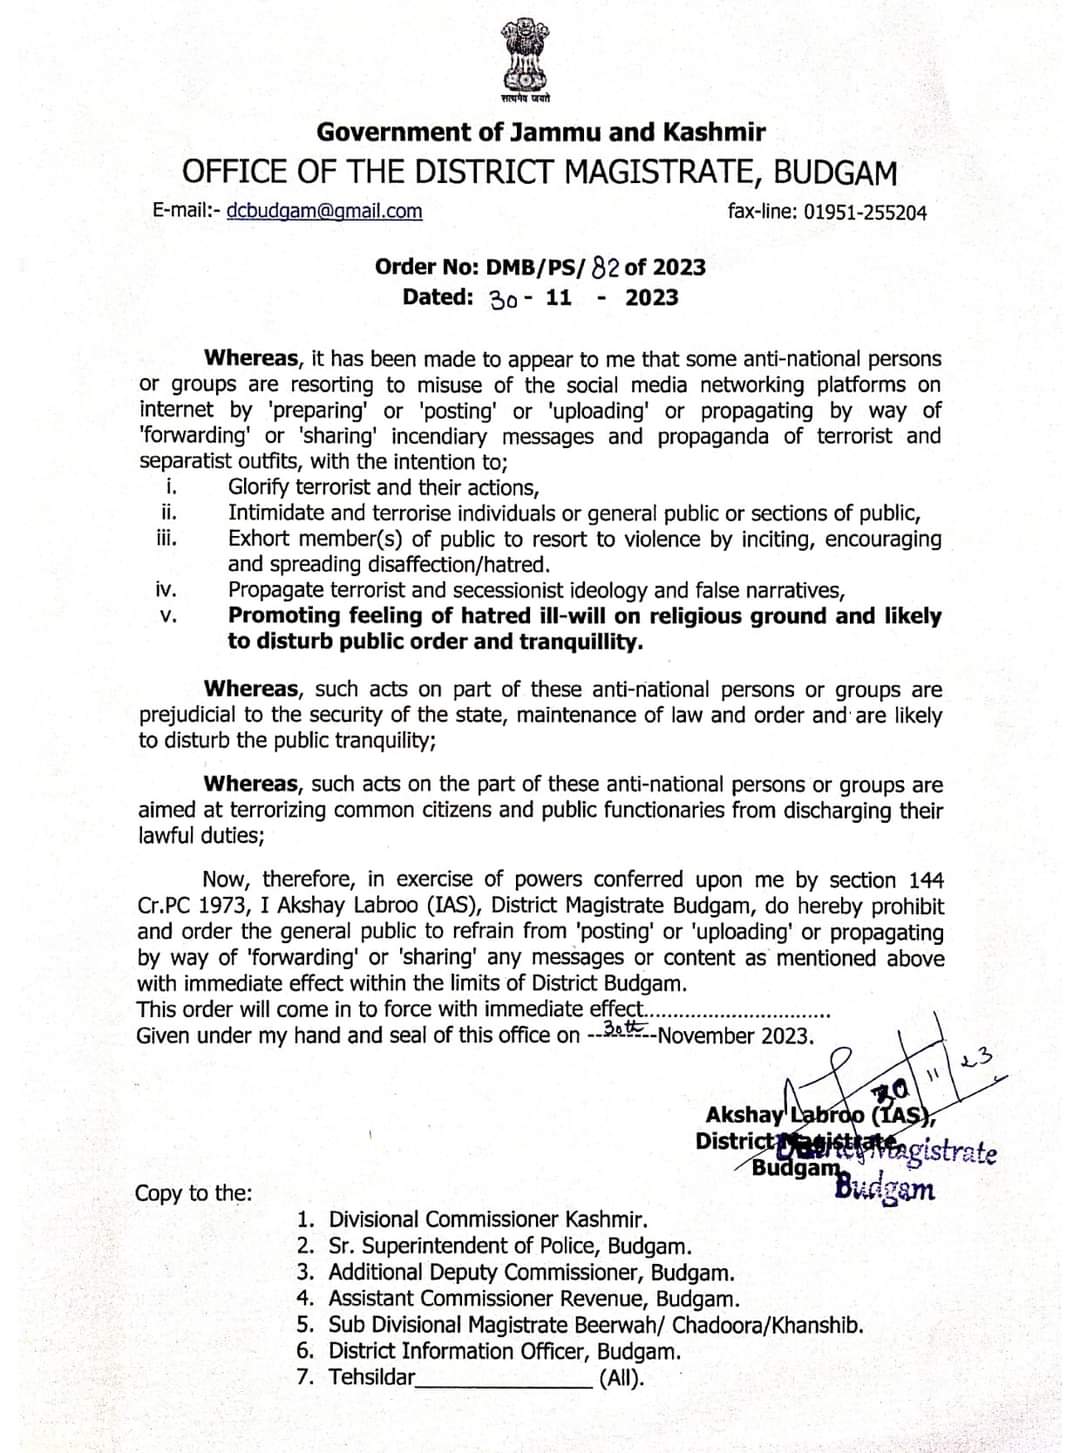 DM Budgam asks Netizens to refrain from misuse of Social-media Networking Platforms